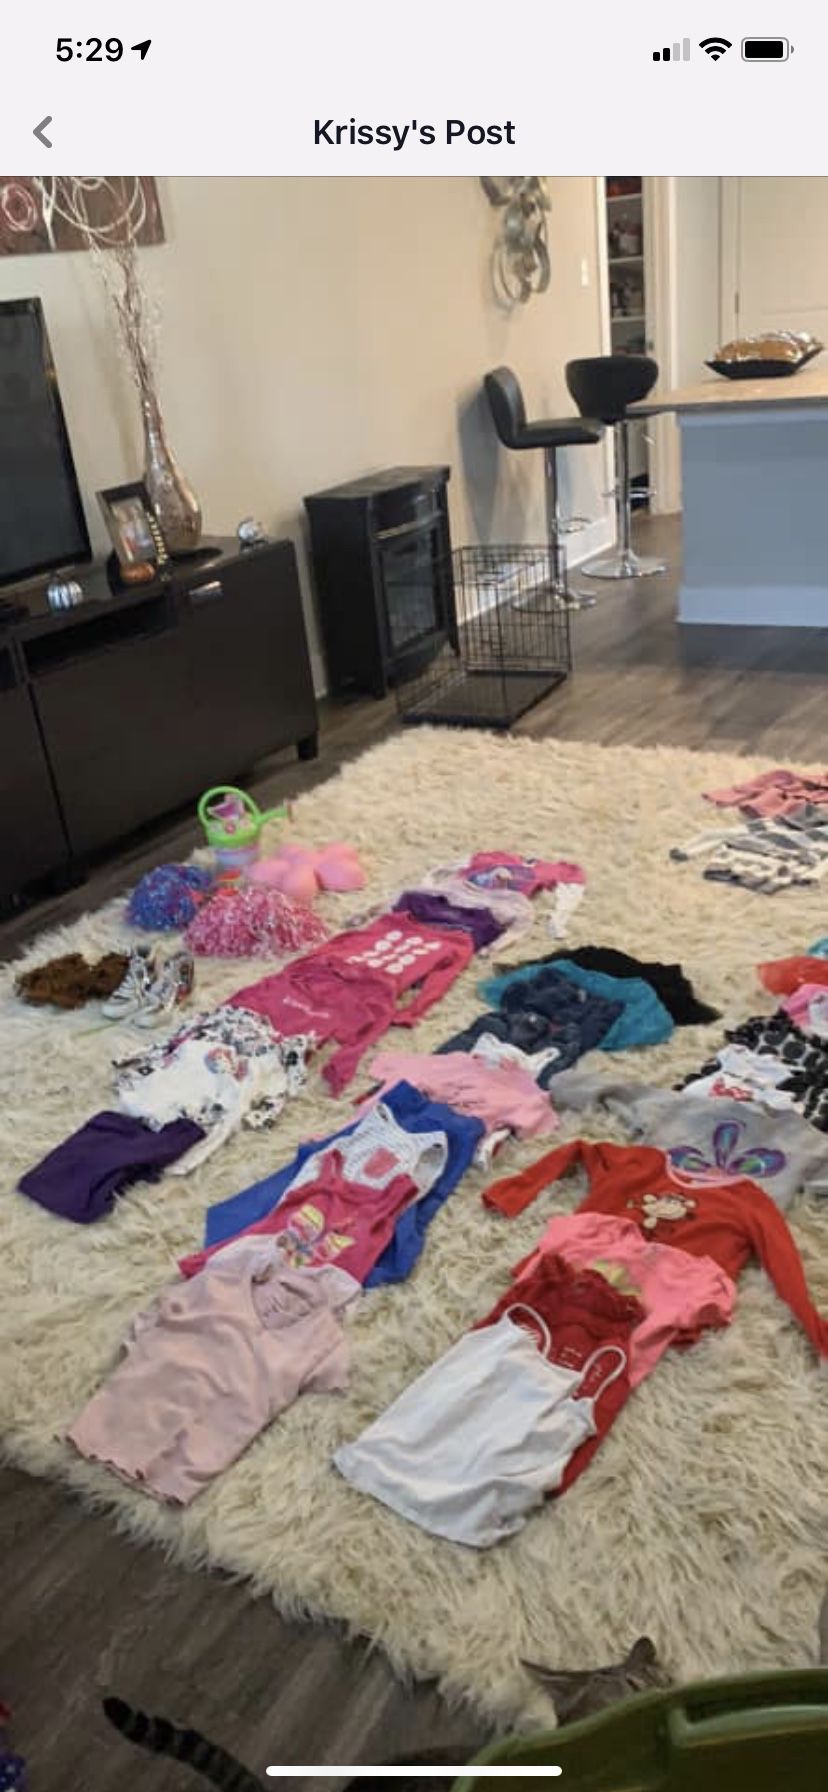 Kids stuff clothes from 3 to 6 girls $1/$2$6 purses